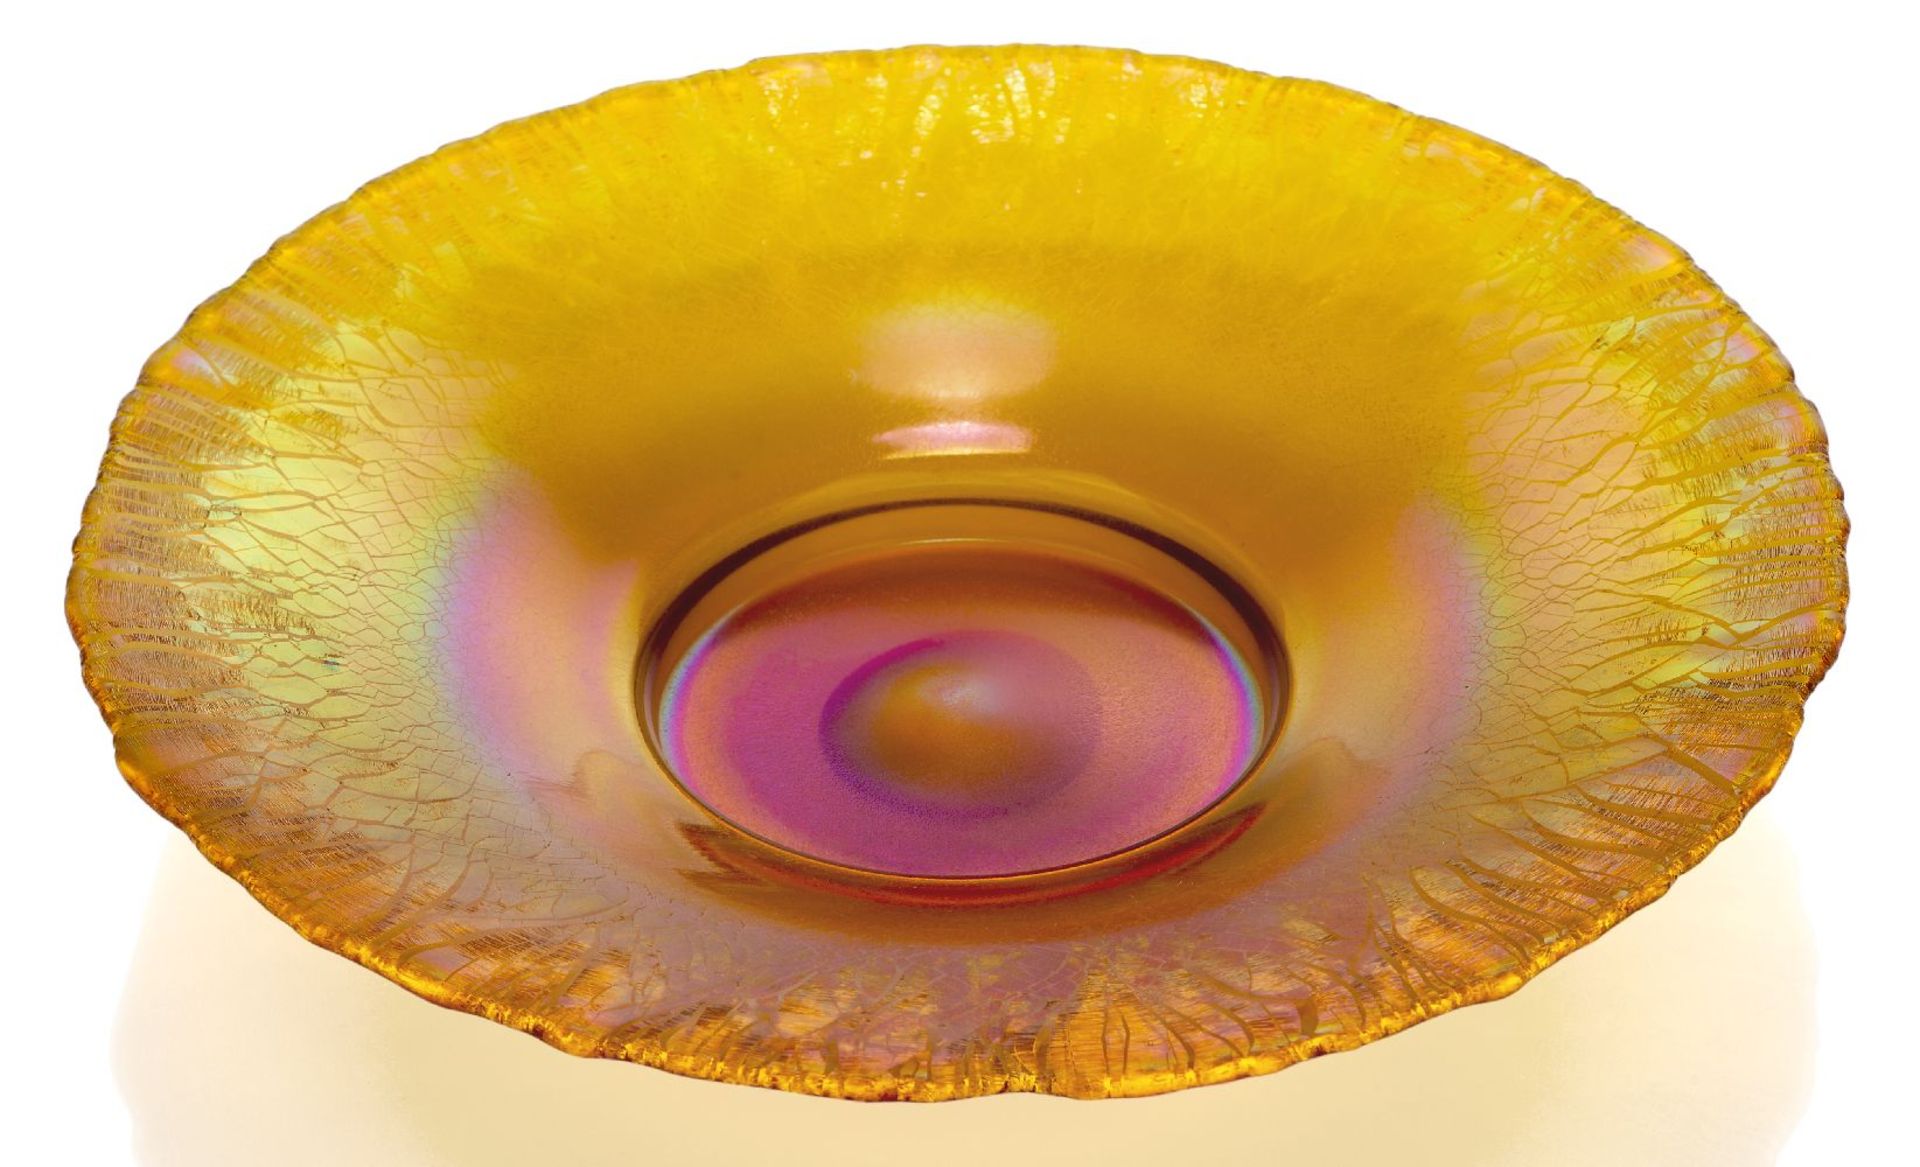 Attributed to WMF, a 'Myra' iridescent glass dish, c.1930, ground out pontil, Decorated with orange,